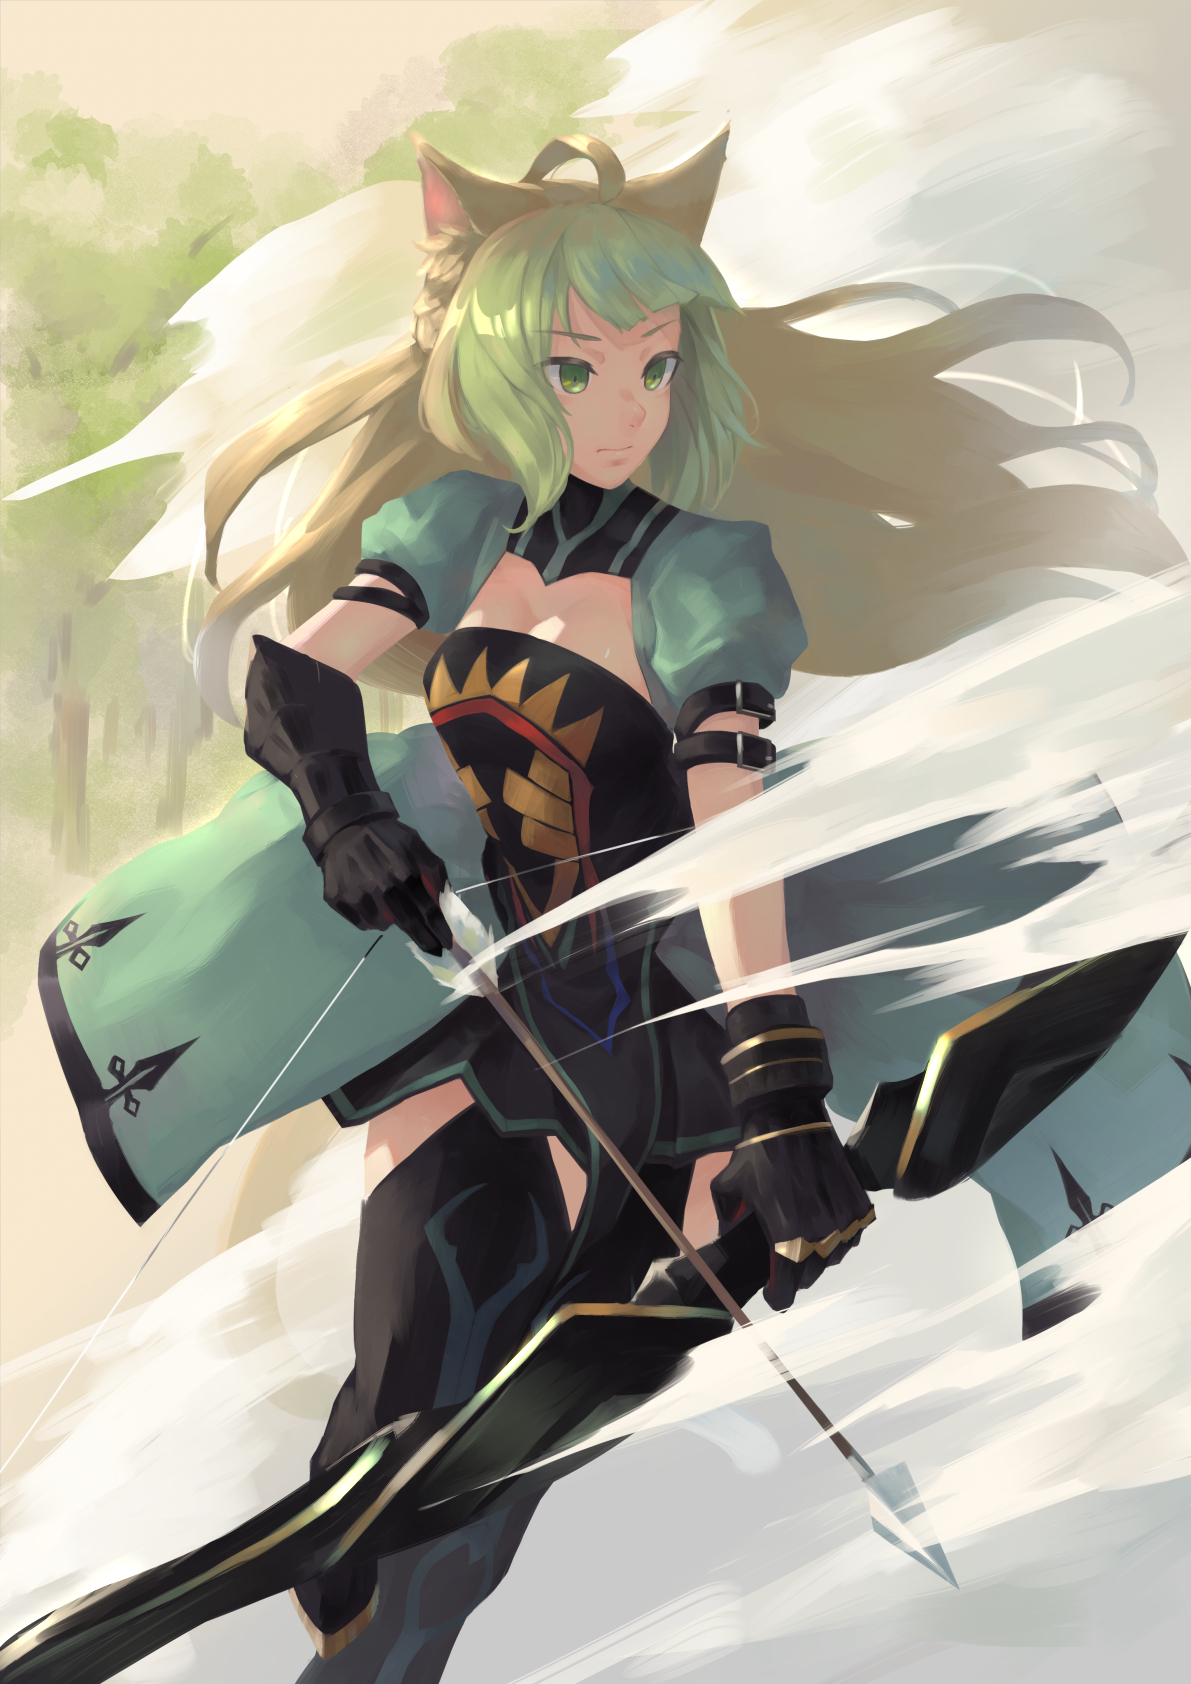 Fate Series Fate Apocrypha Anime Girls Archer Of Red Atalanta Fate Grand Order Long Hair Fantasy Wea 1191x1684